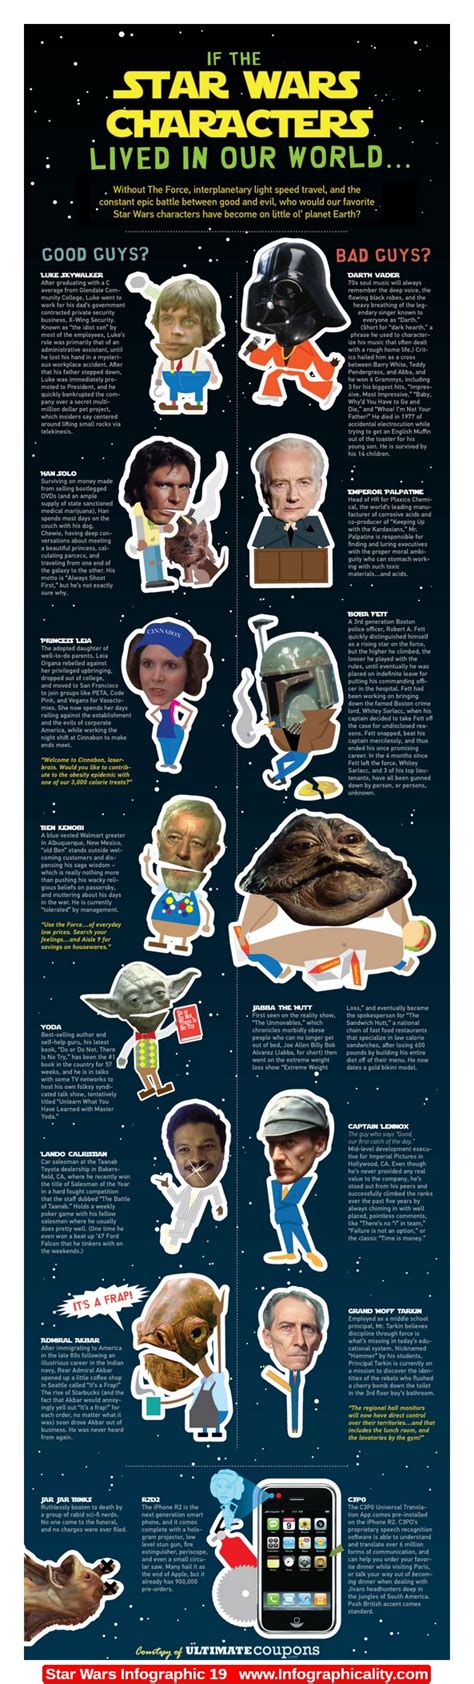 Star Wars Infographic 19 Infographicality Star Wars Infographic